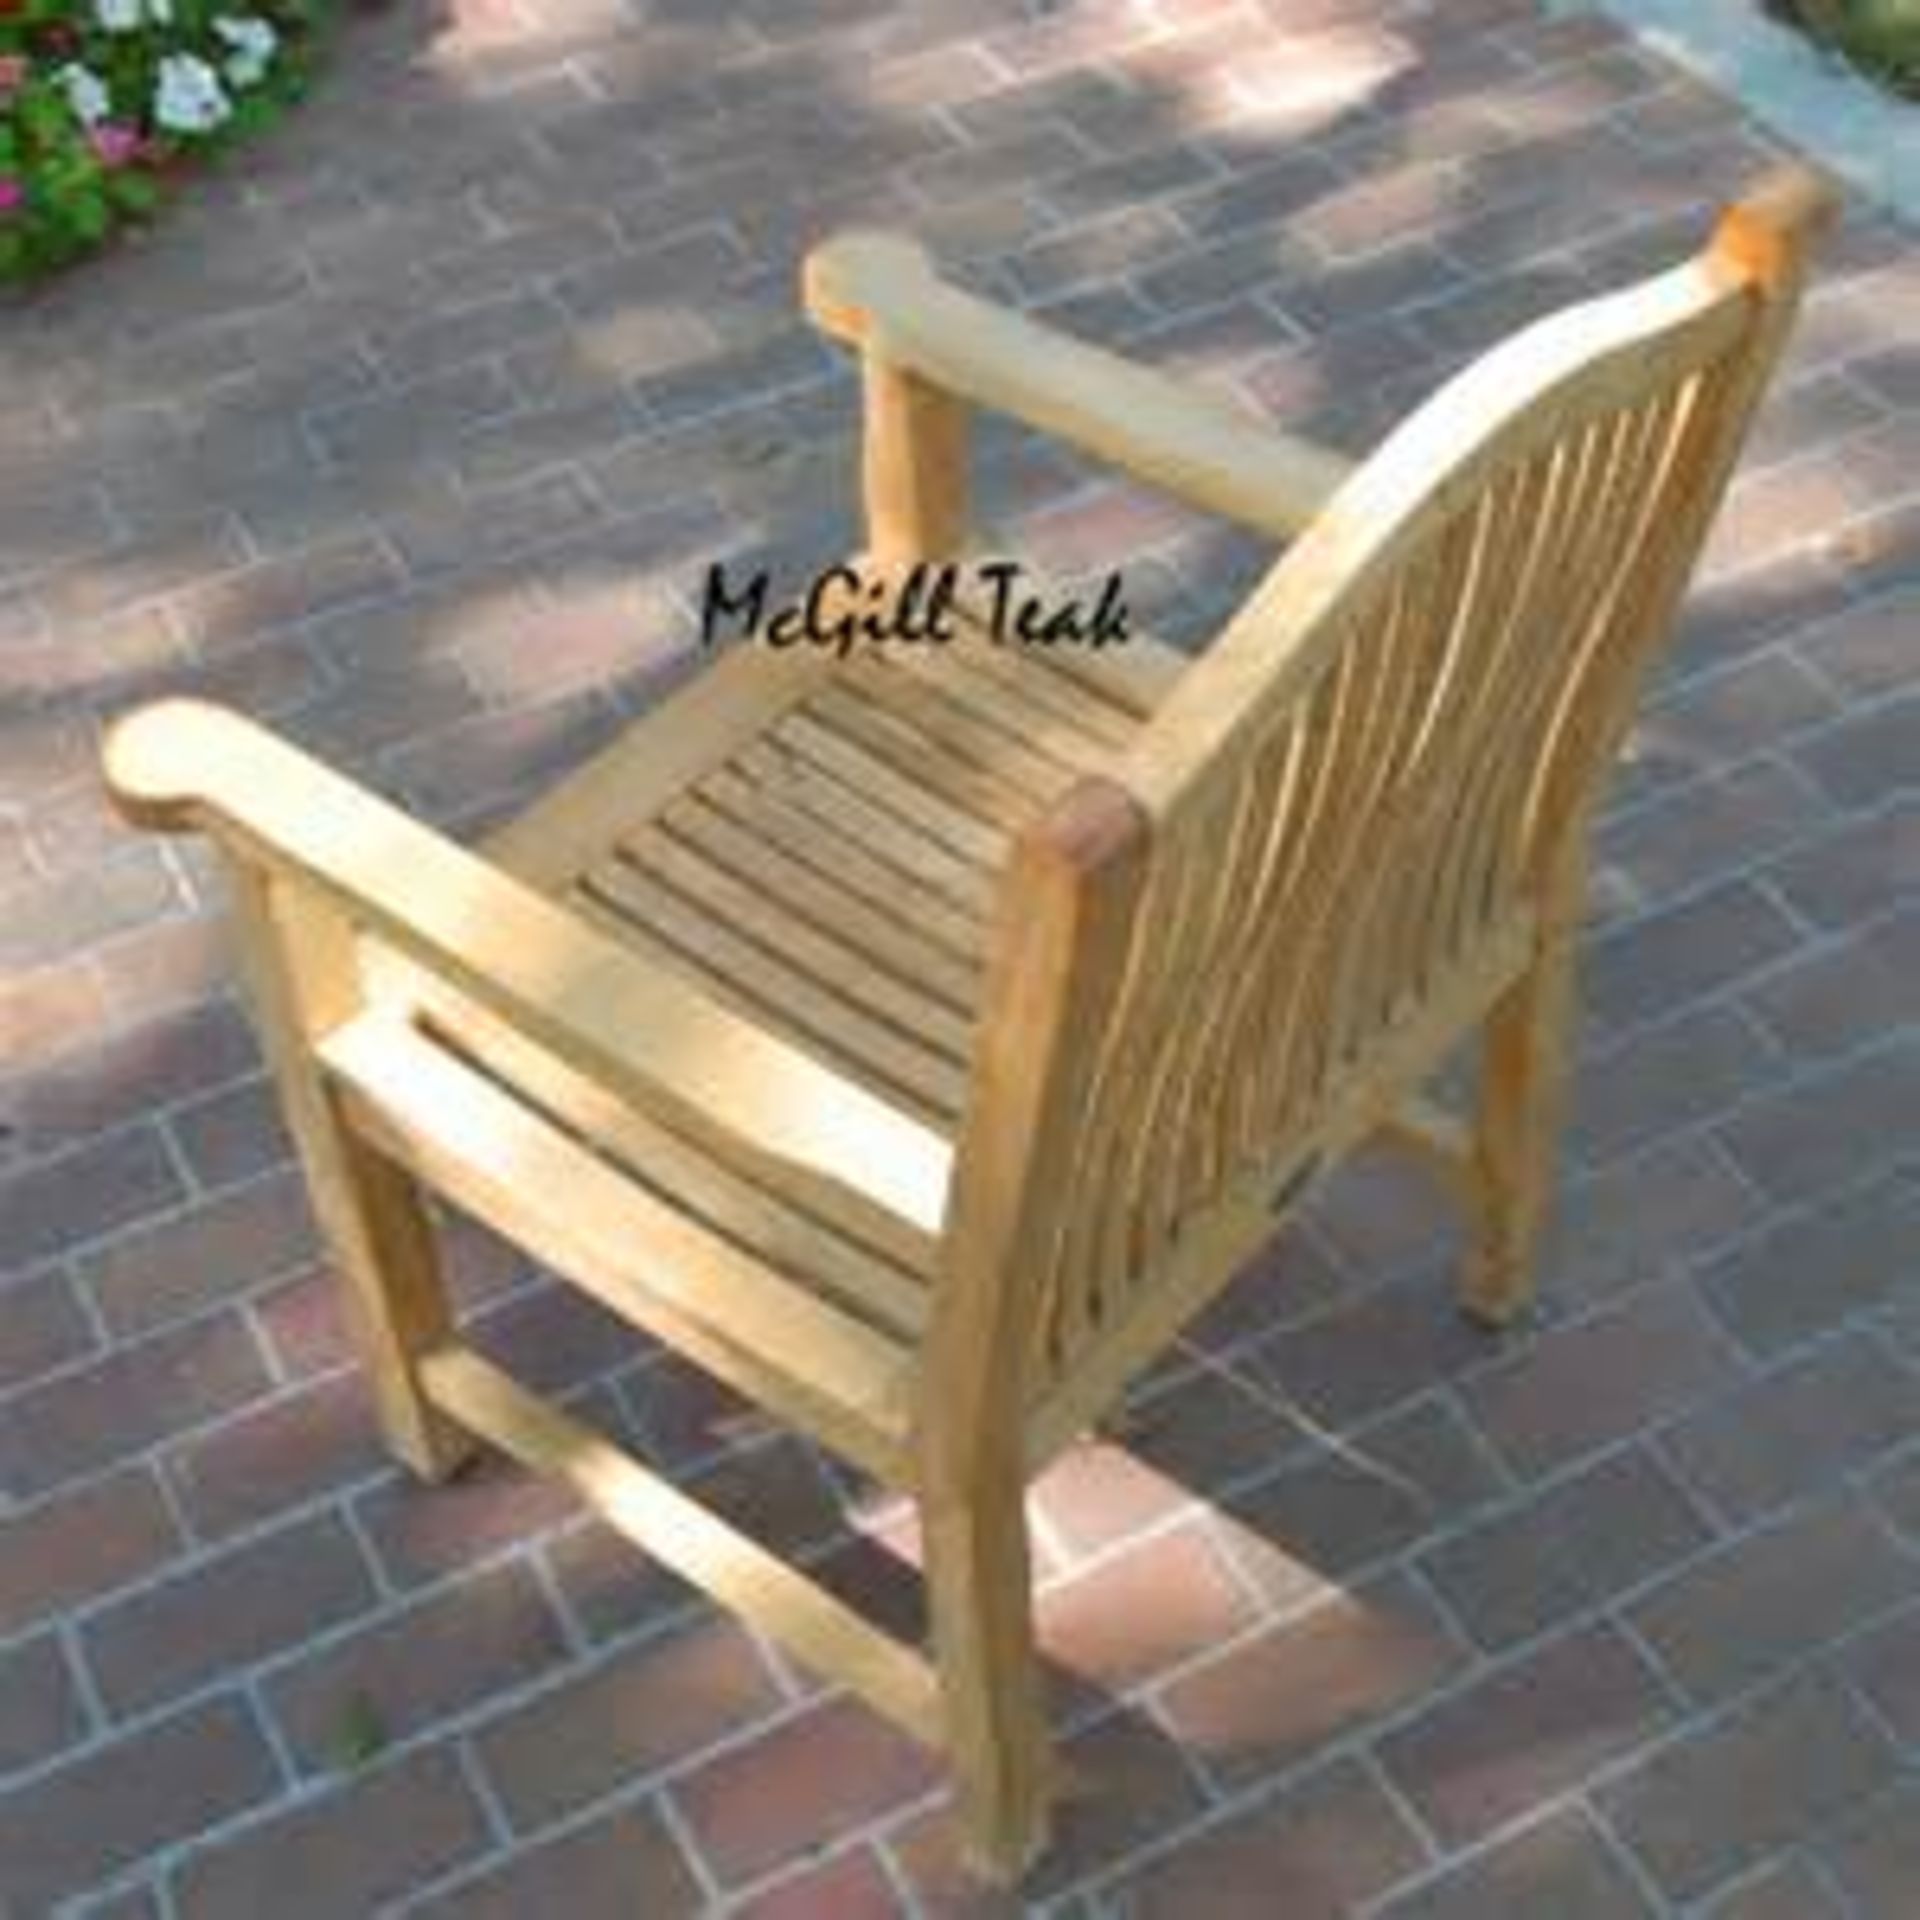 V Brand New TEAK STACKING CHAIR - Made From Grade A Plantation Teak/ RRP £199/ NOTE: Item Is